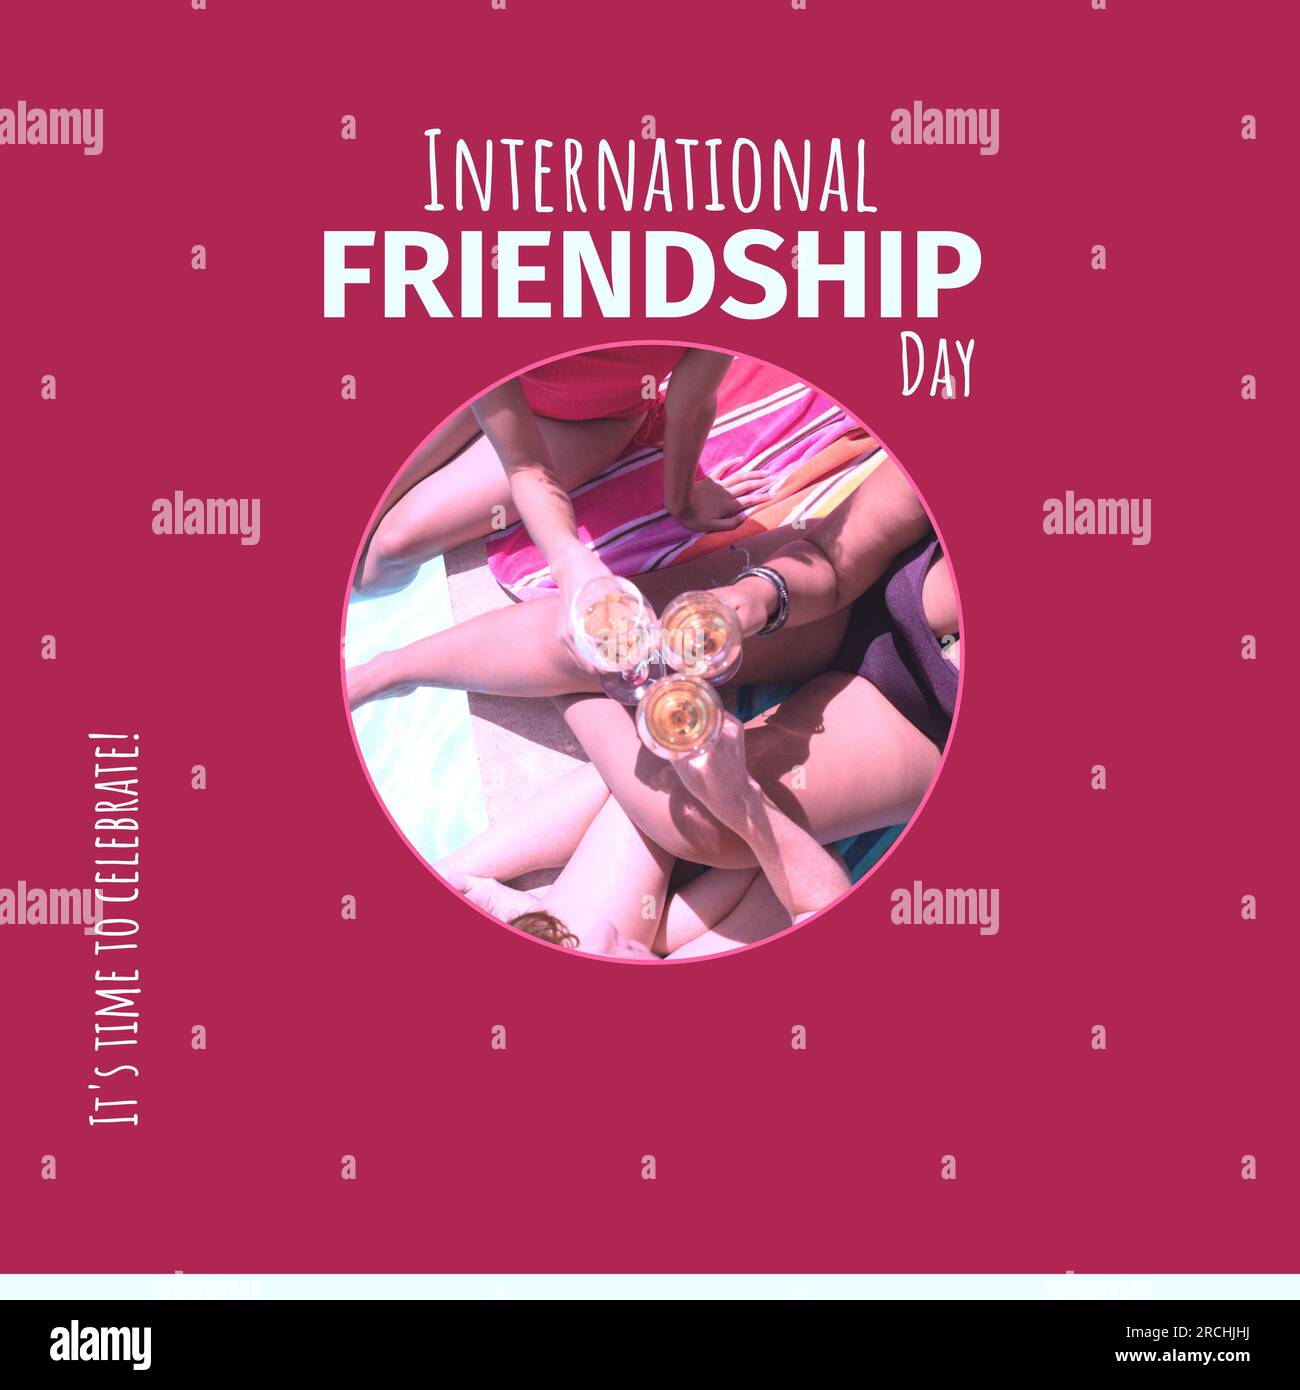 International friendship day text on red with diverse female friends making a toast Stock Photo